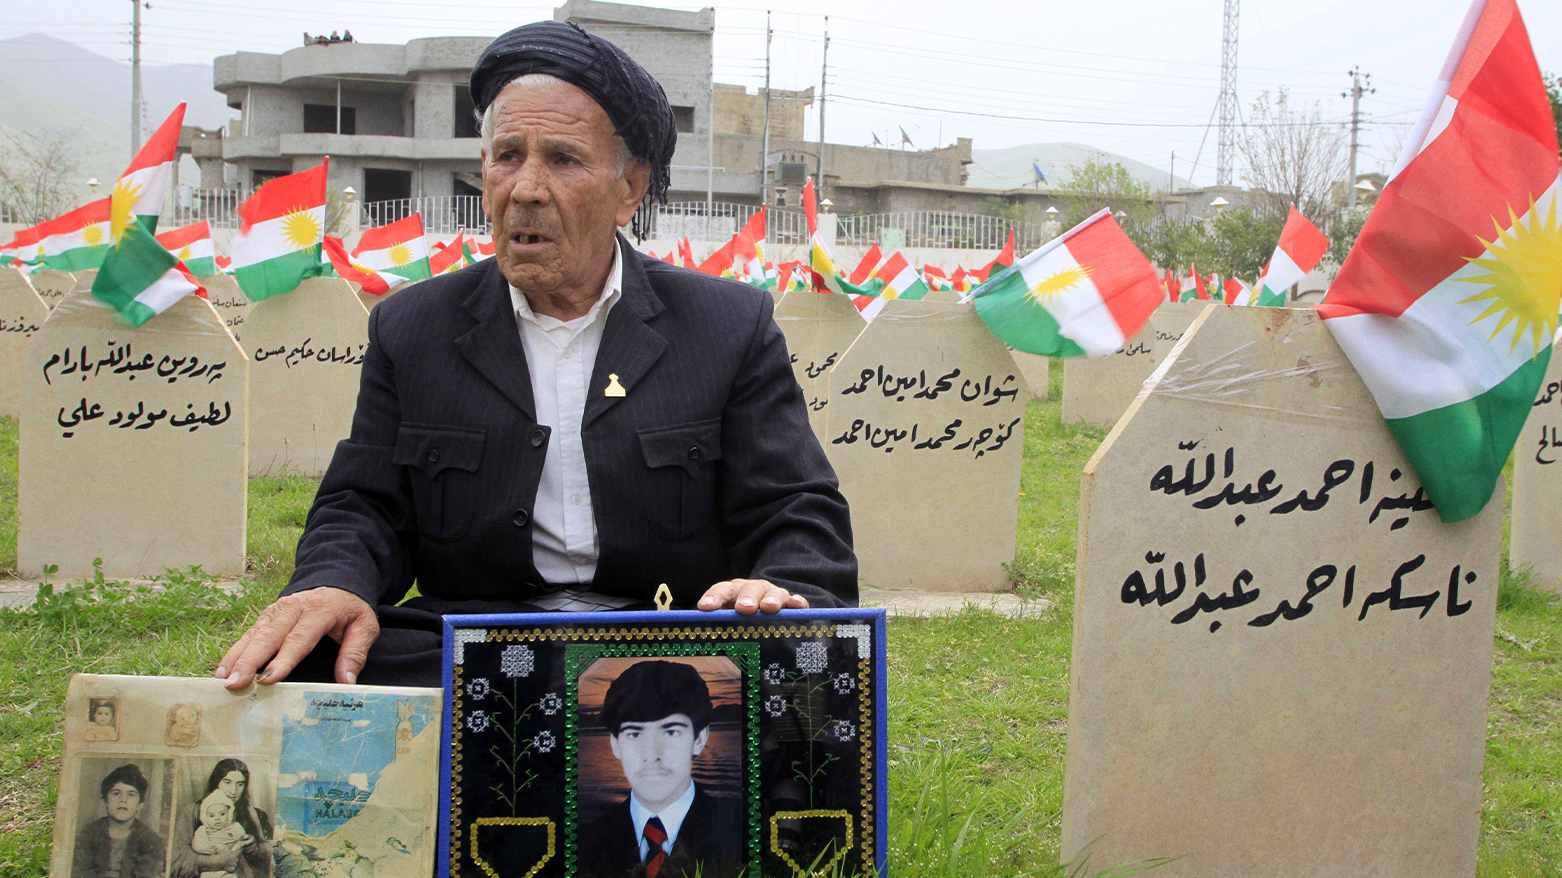 The photo shows Mohammed Abdullah, 57, holding pictures of his family members killed in the 1988 chemical attack during a memorial service in Halabja, Iraq. (Photo: AP/Yahya Ahmed)